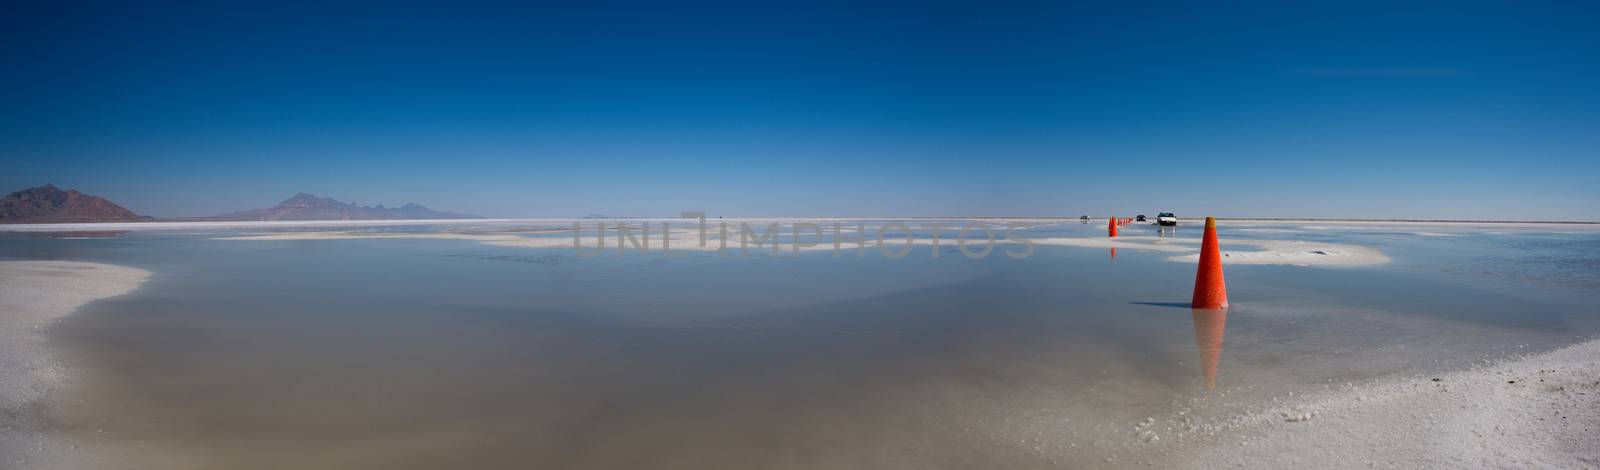 World famous Bonneville Salt Flats outside Salt Lake City Utah with mountains and blue skies. Detail of the salt on the ground